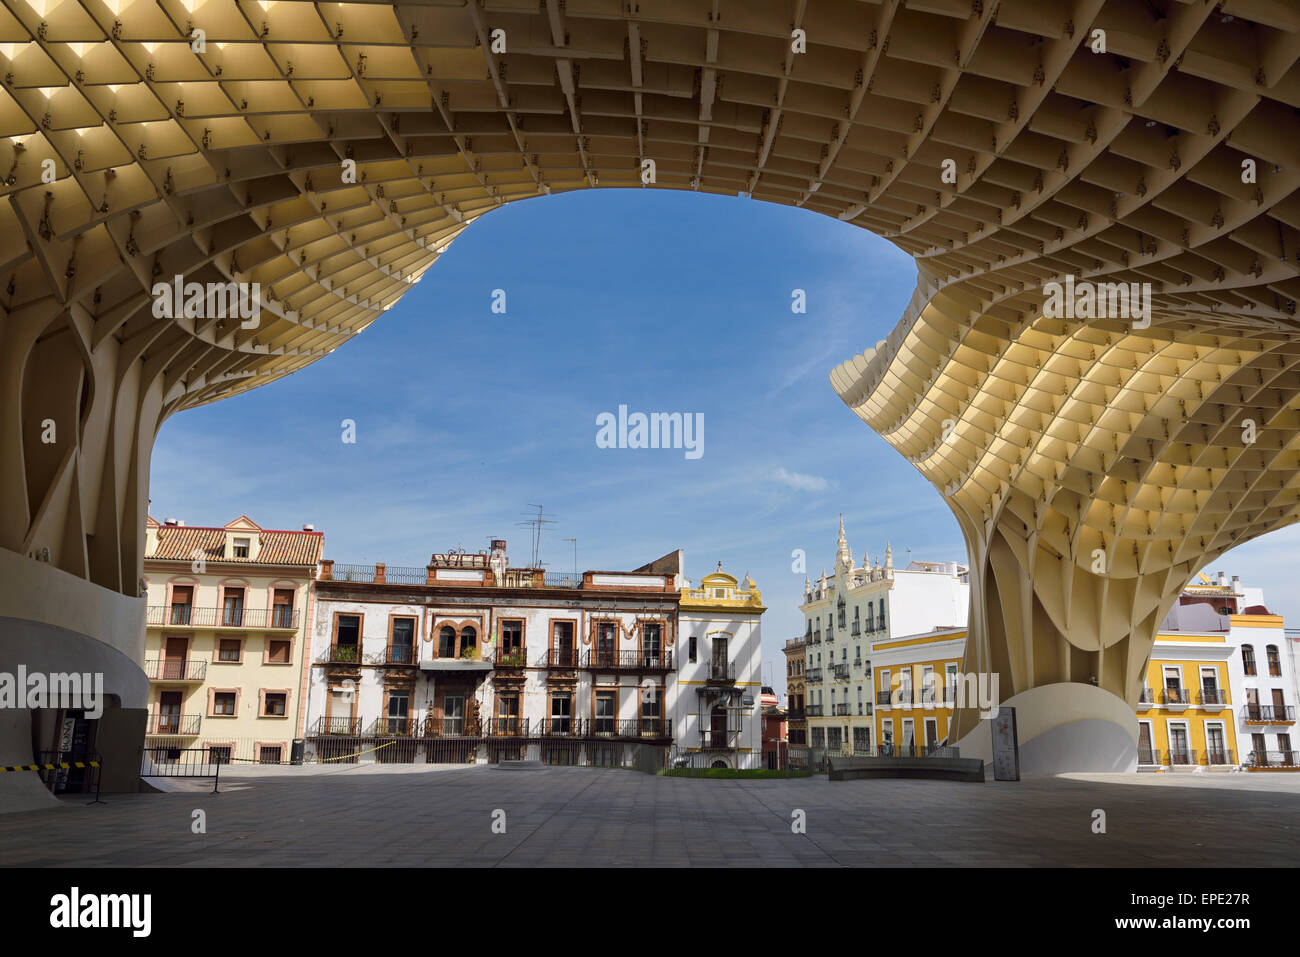 Canopy of Metropol Parasol framing buildings around Plaza of the Incarnation Seville Spain Stock Photo